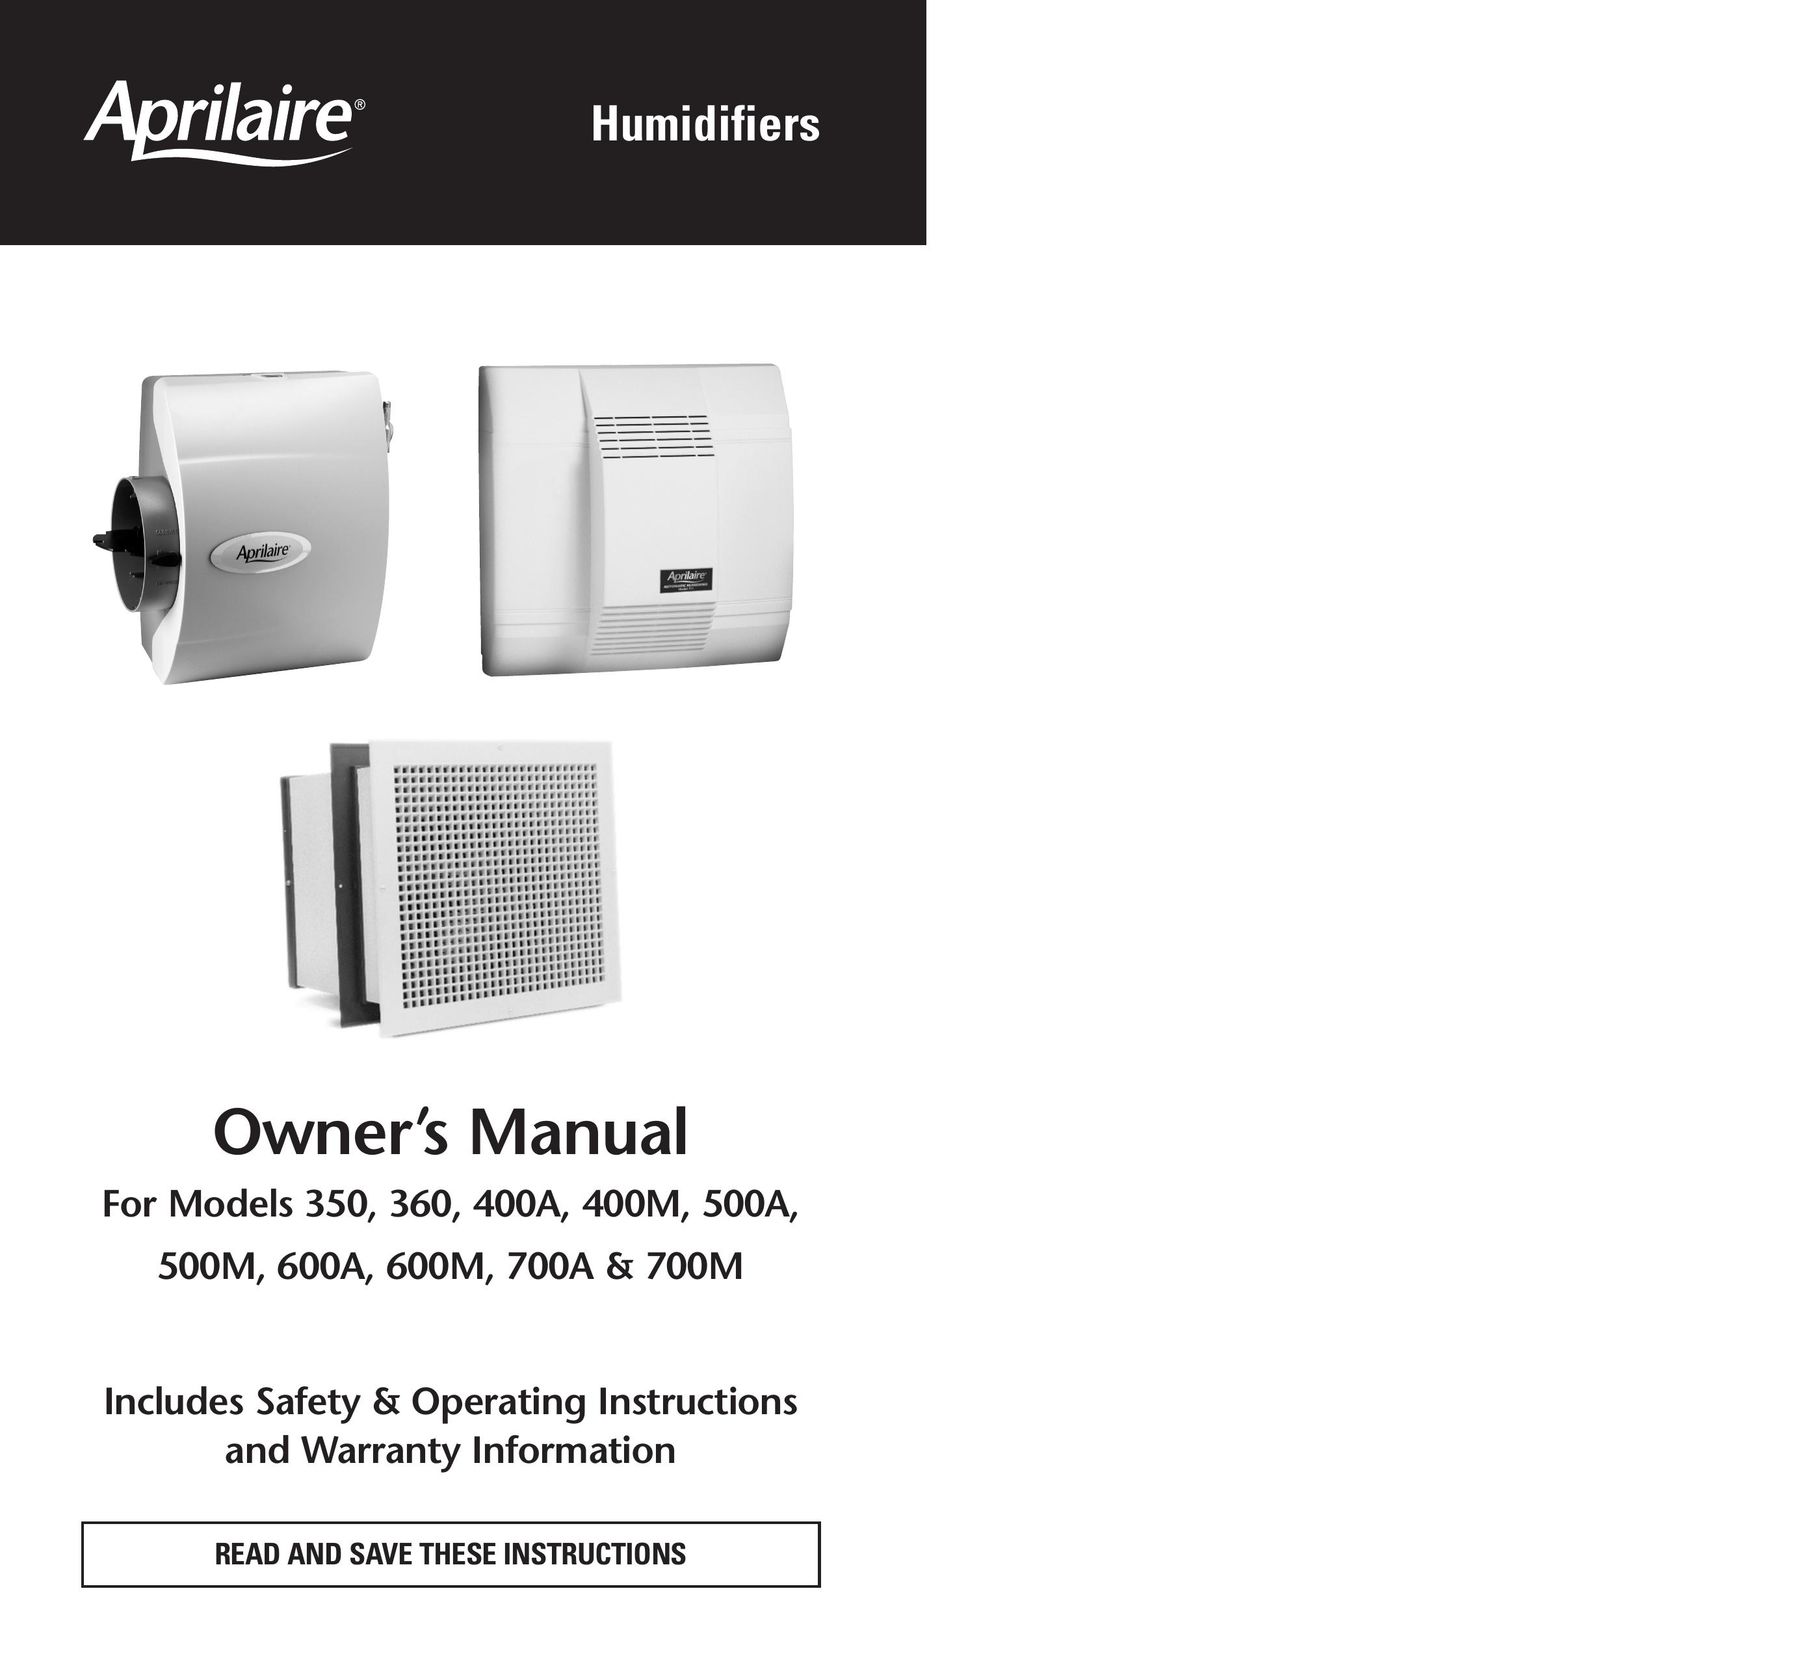 Aprilaire 400M Humidifier User Manual